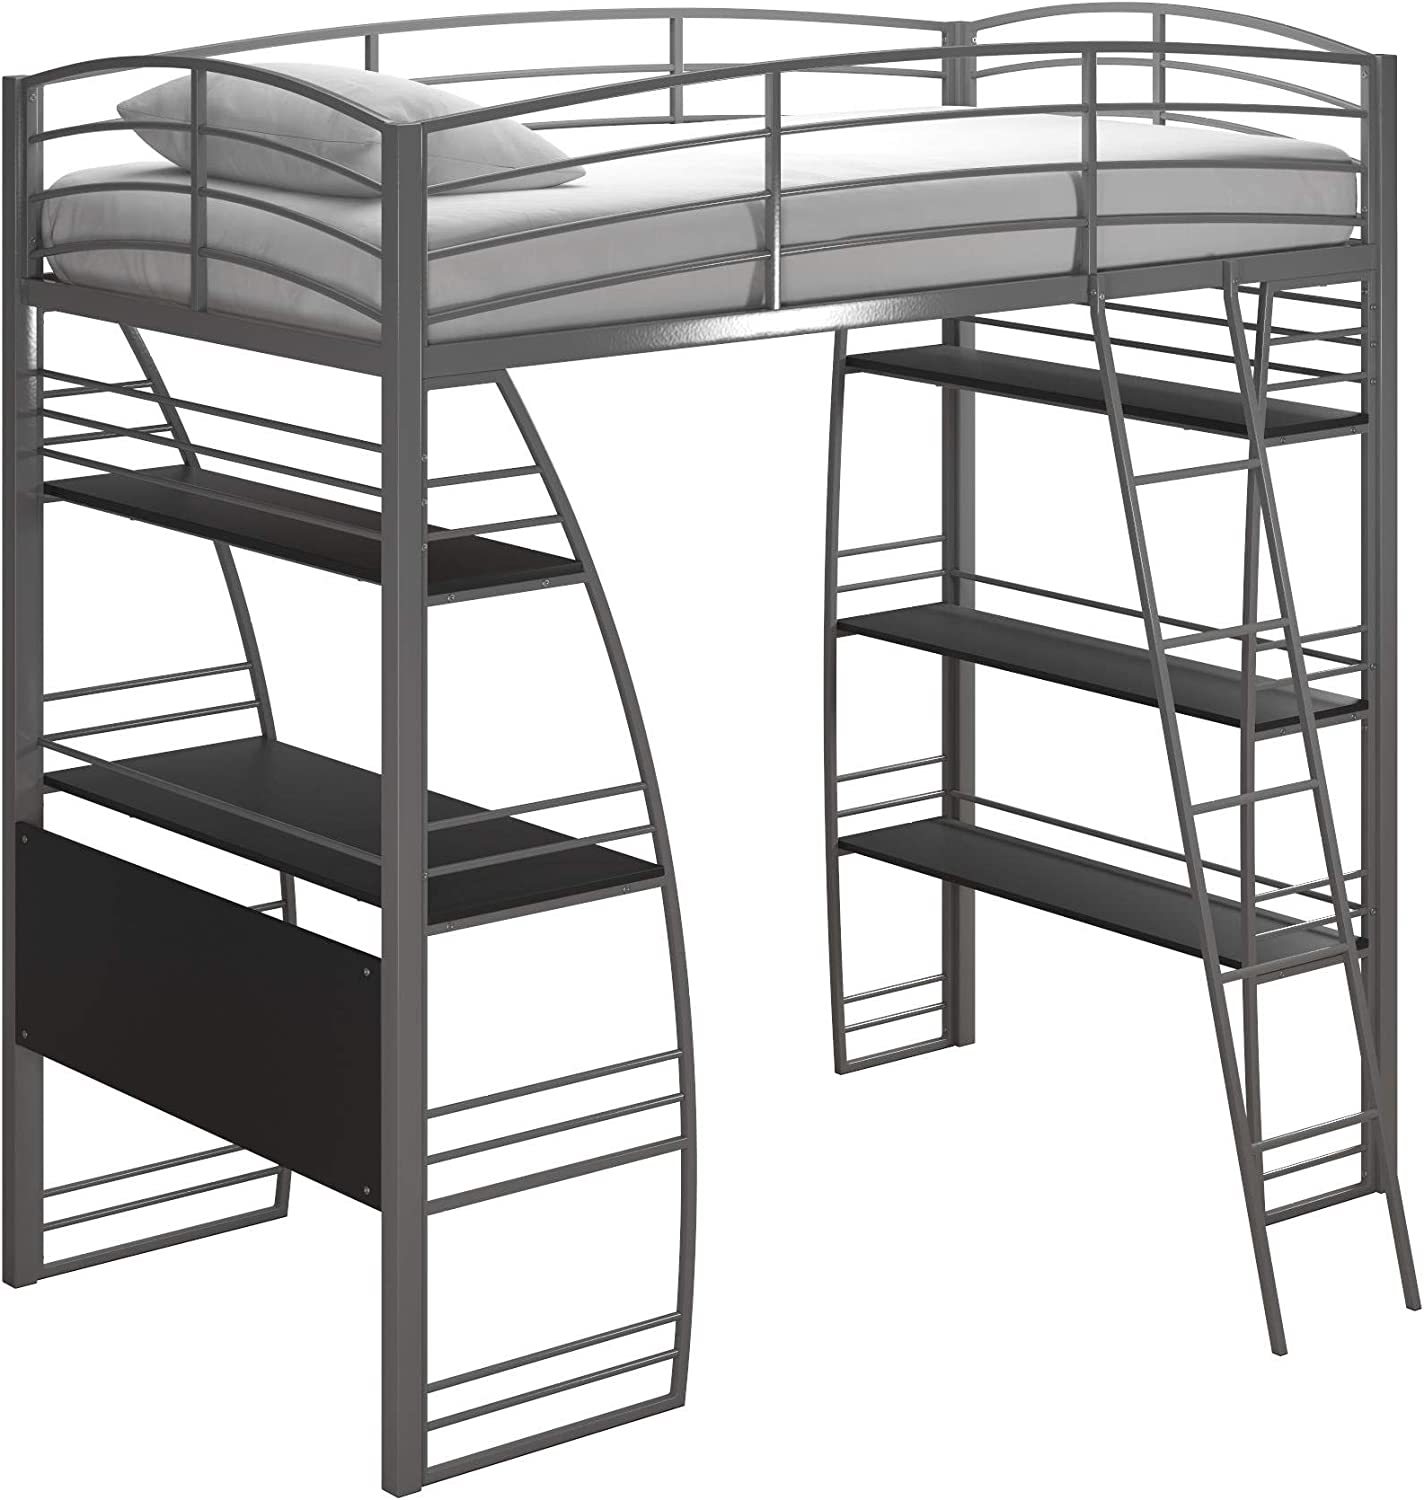 DHP Studio Loft Bunk Bed Over Desk and Bookcase with Metal Frame - Twin (Gray) - $497.99